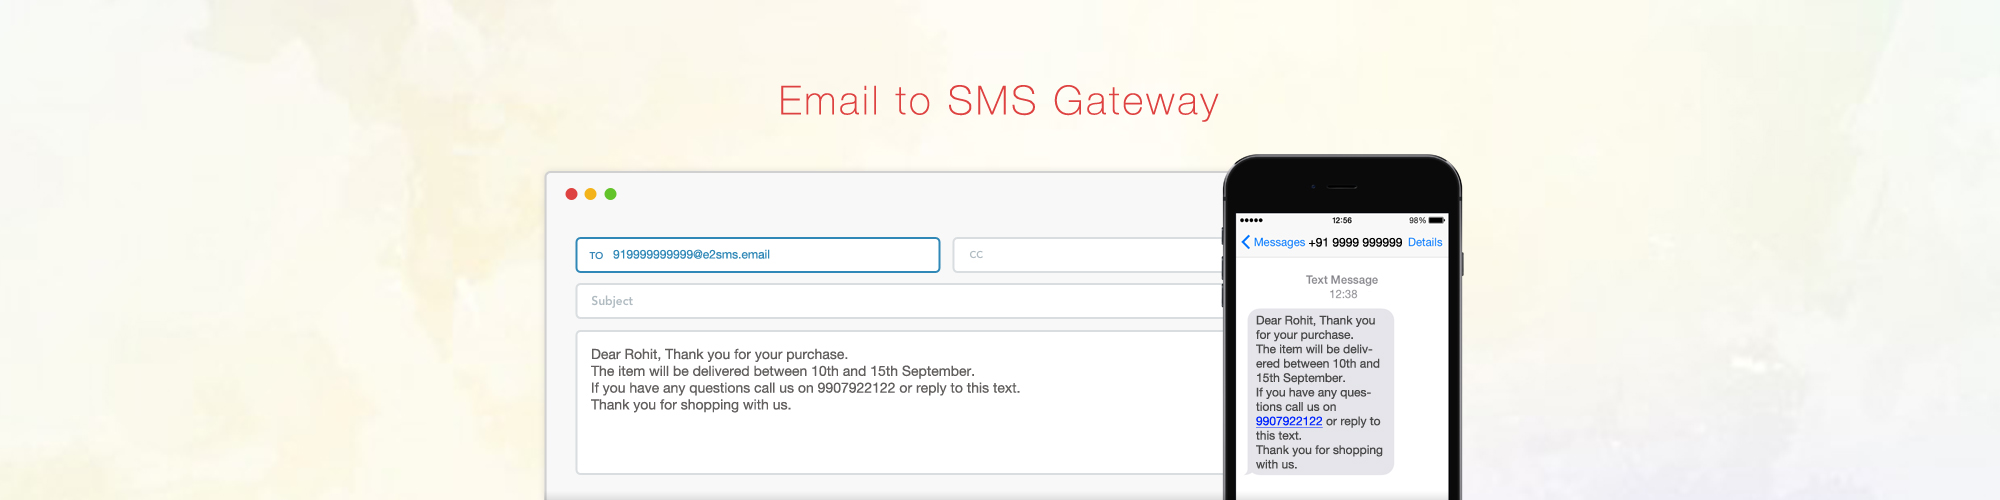 Email to SMS Gateways